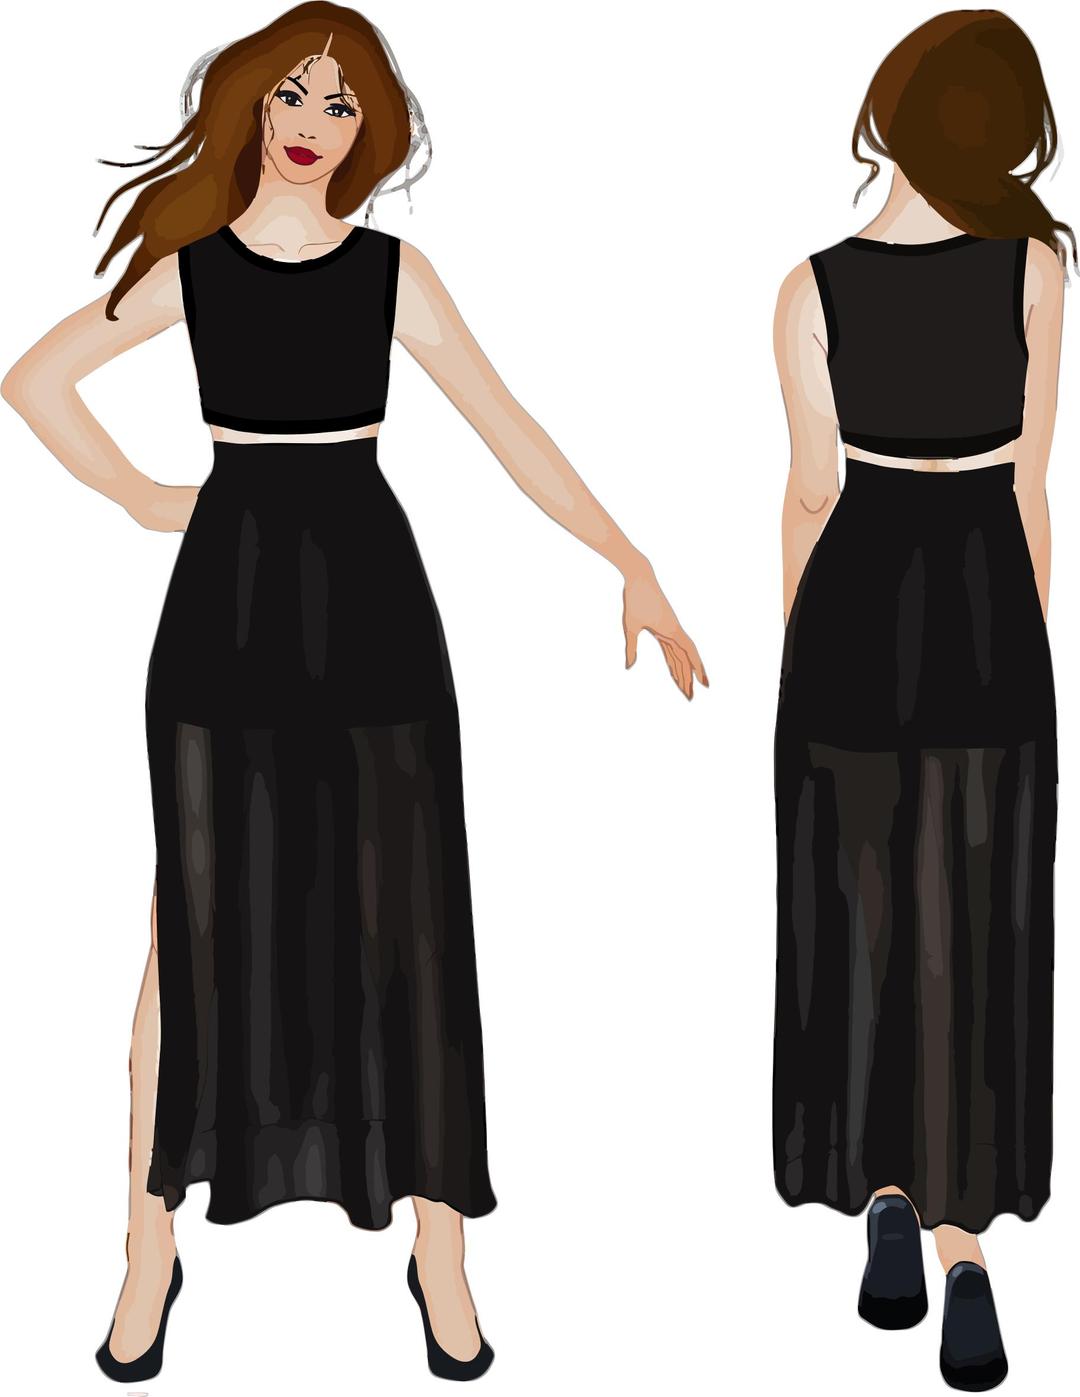 Front And Back View Woman 2nd Attempt png transparent